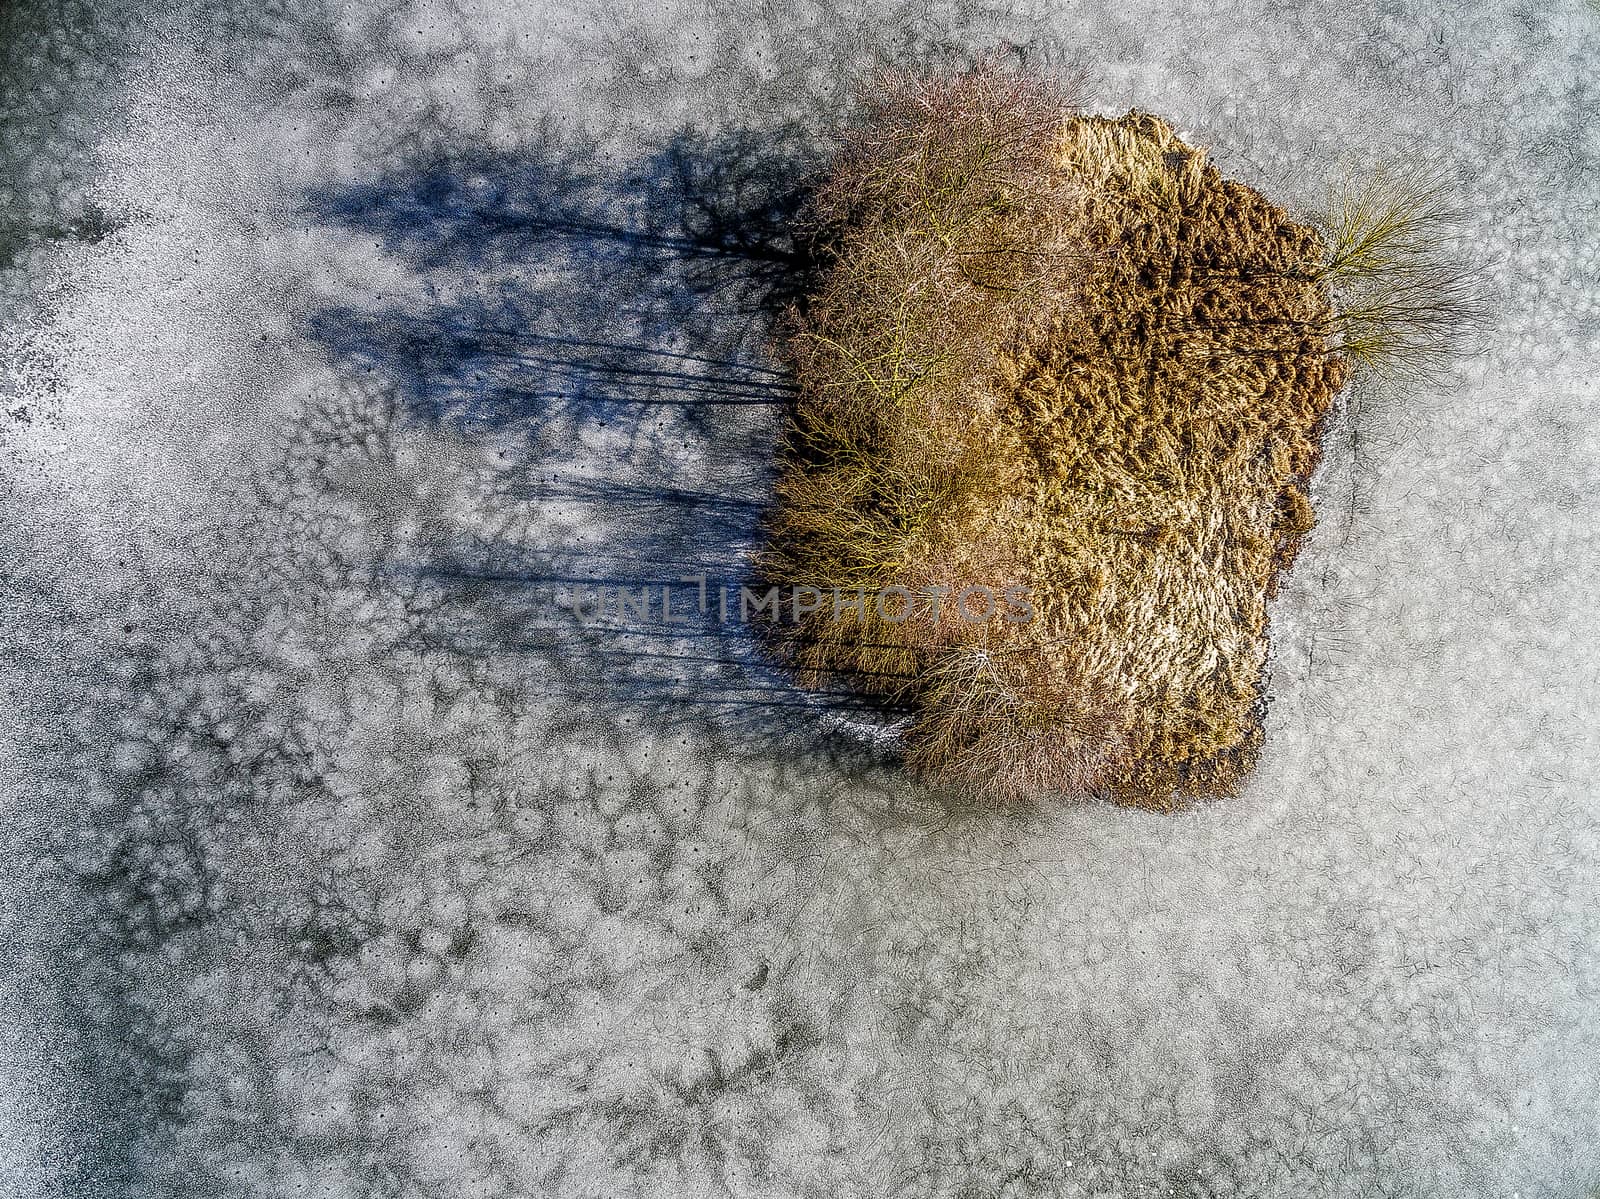 small island in winter on an icebound lake with beginning thaw by geogif